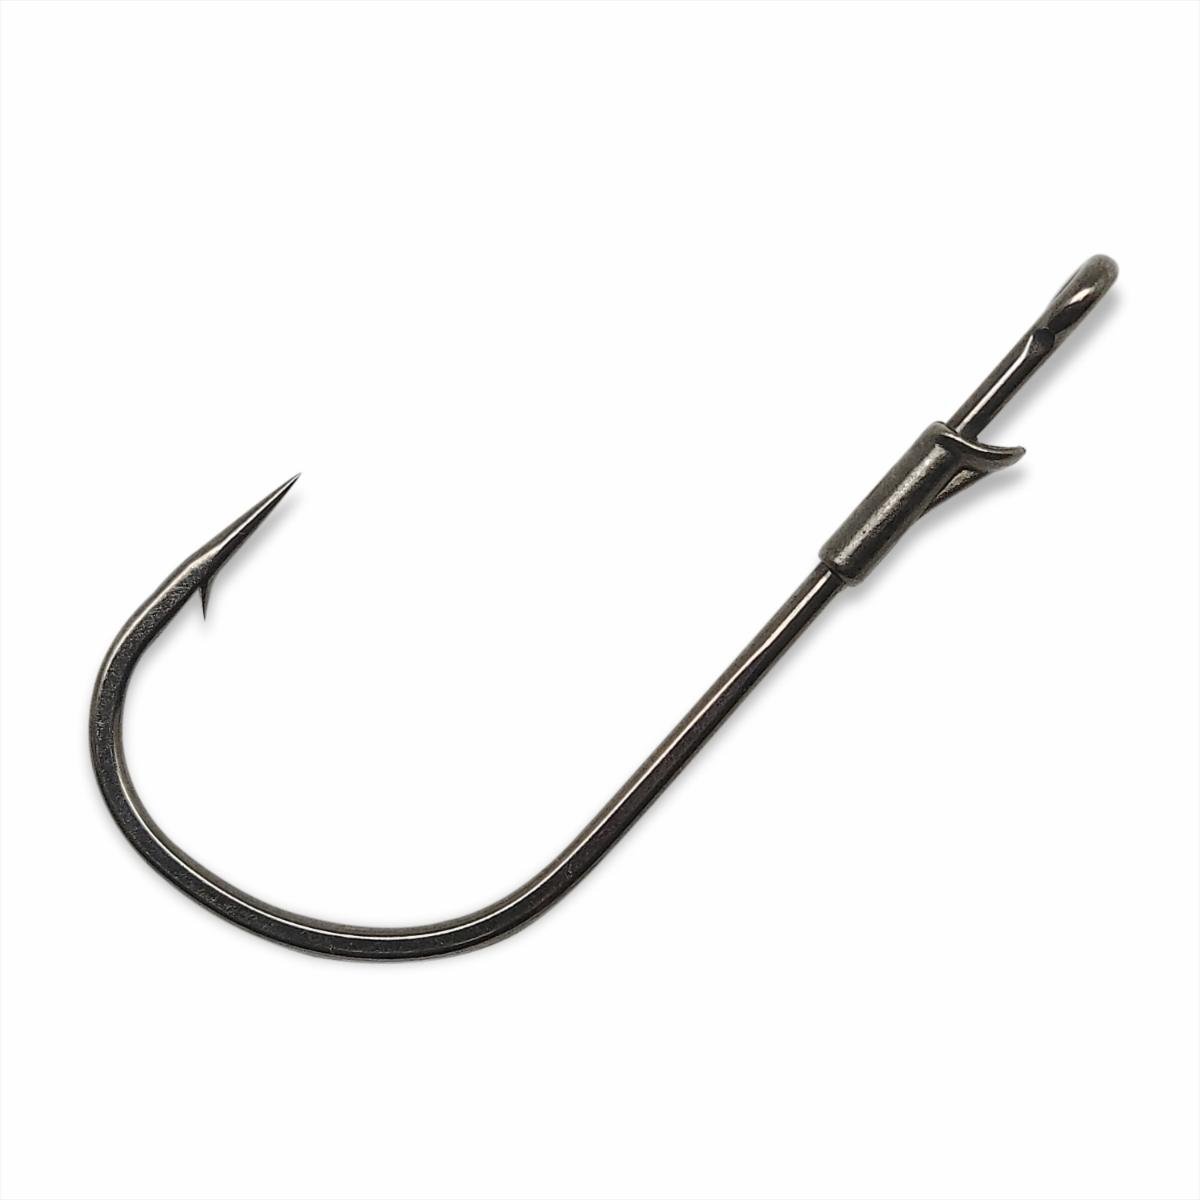  Mustad O'Shaughnessy Jig Hook, 60º Bend, Extra Long, Forged 3/0  : Fishing Hooks : Sports & Outdoors